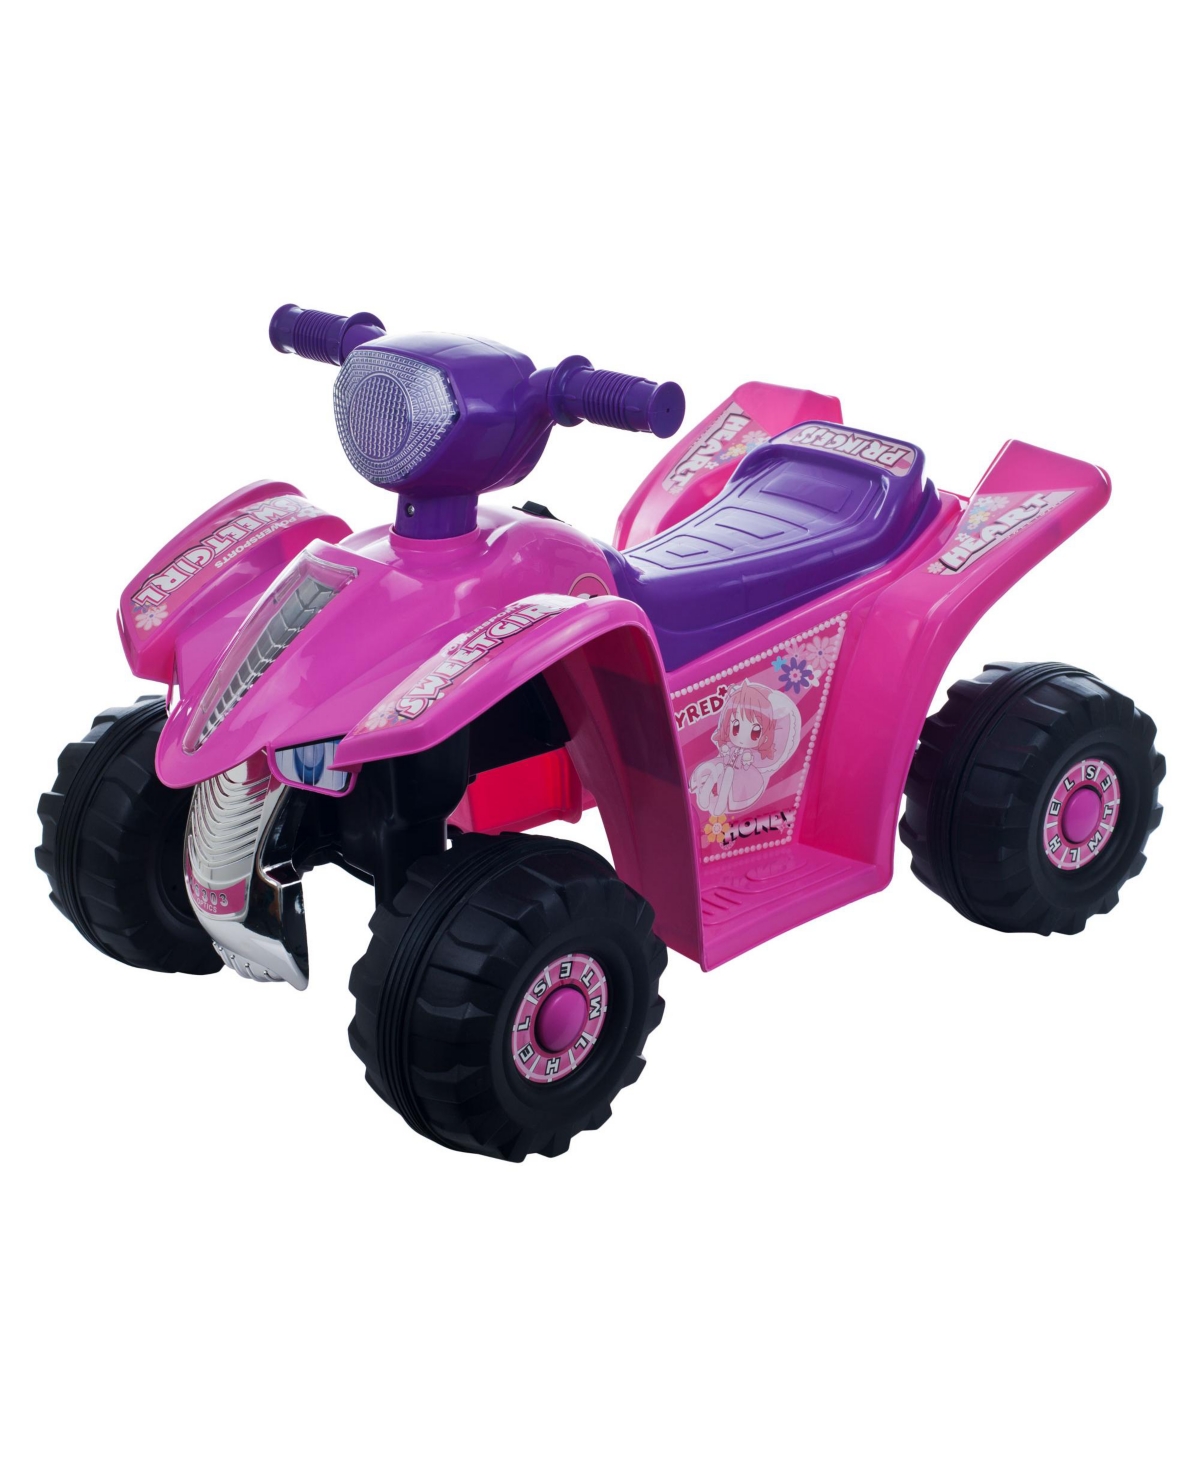 Lil' Rider Battery Powered Ride On Toy Atv Four Wheeler In Pink